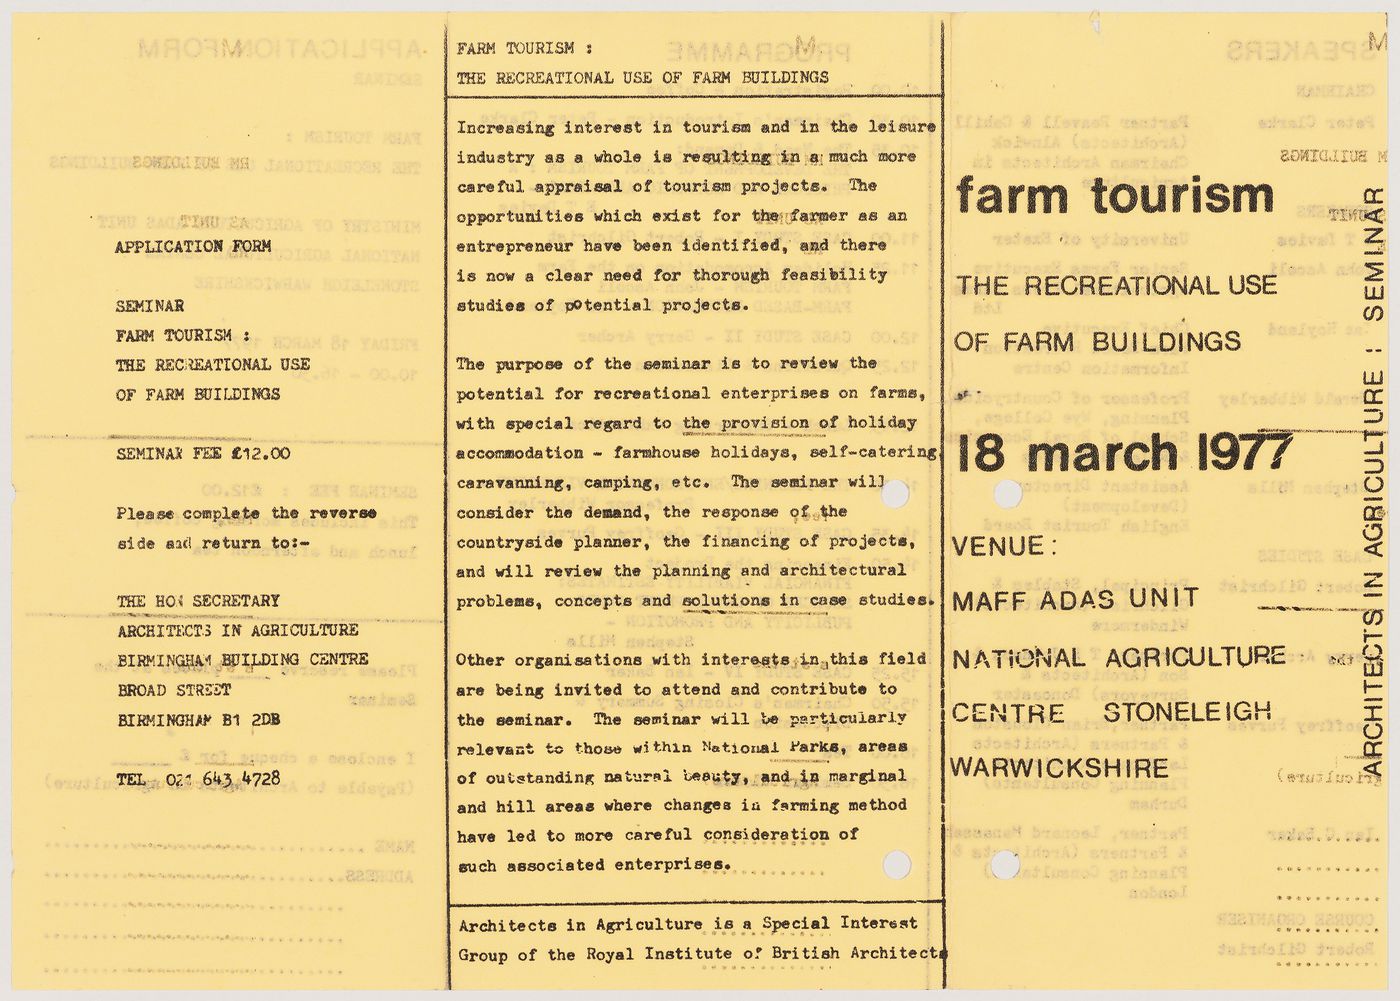 Application form for the seminar "Farm Tourism, the Recreational Use of Farm Buildings", scheduled for 18 March 1977 (from the Westpen project records)